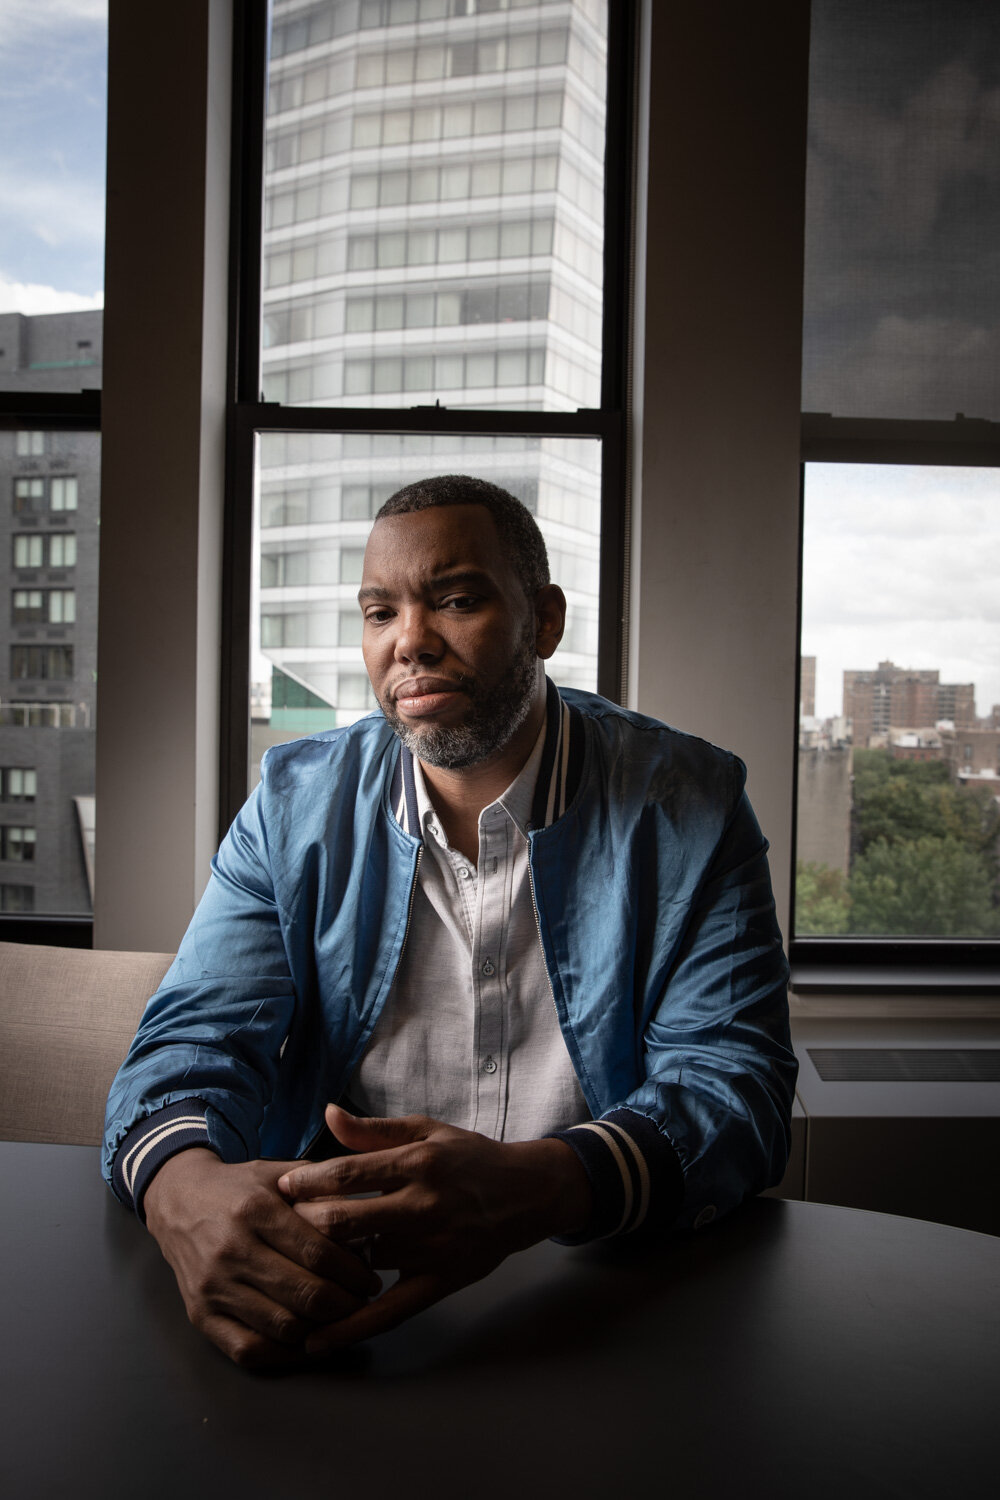  NEW YORK 2018 09 24 Ta-Nehisi Coates, American writer, journalist and teacher. Photographed on assignment for Dagens Nyheter.  